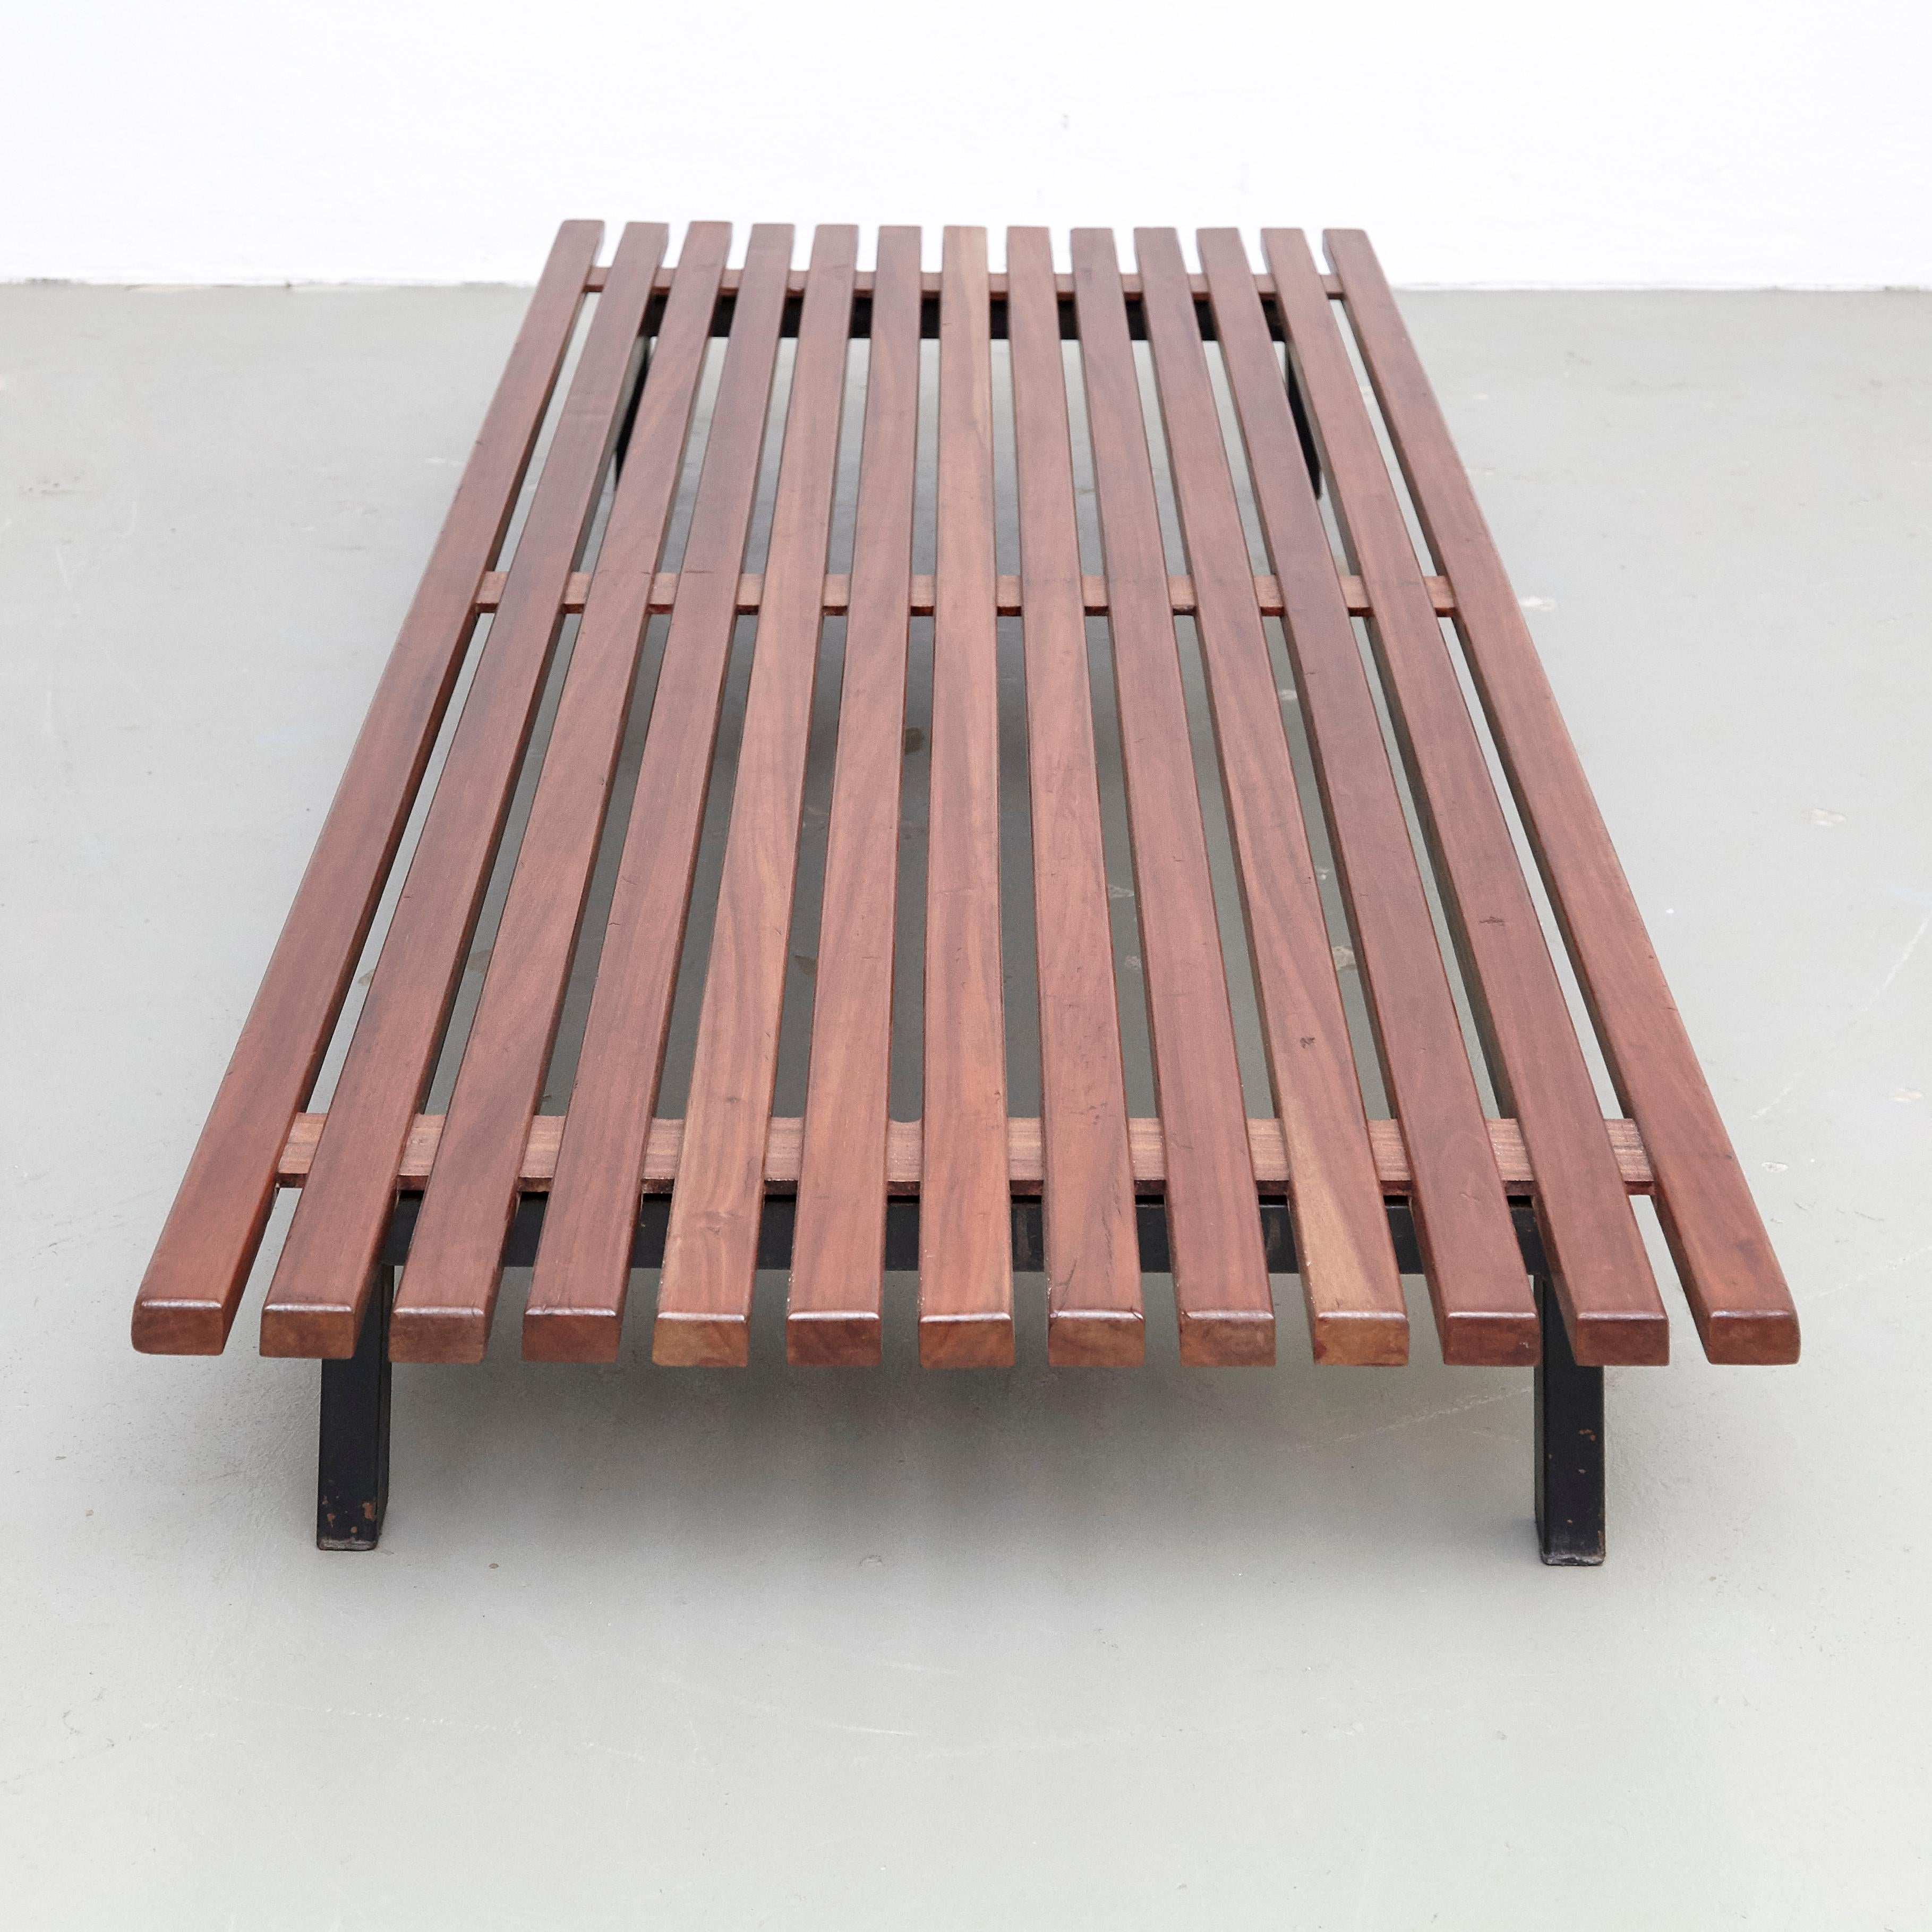 French Charlotte Perriand Mid Century Modern Cansado Bench, circa 1950